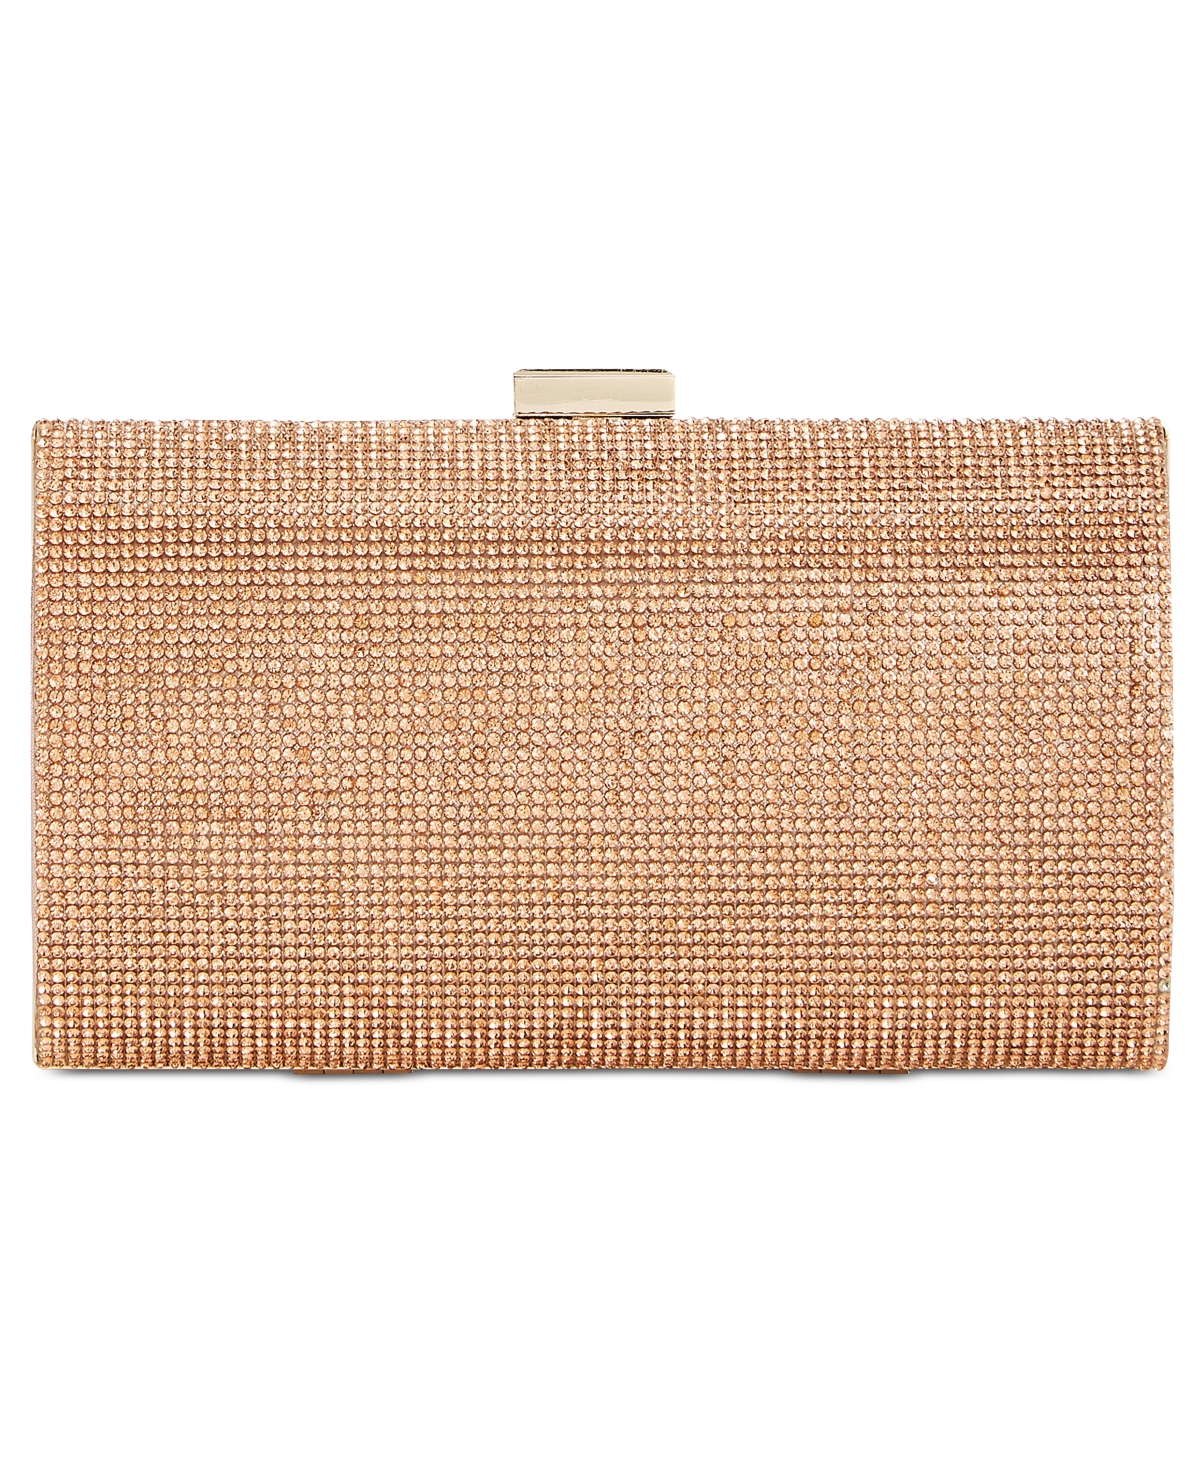 Inc International Concepts Ranndi Sparkle Clutch, Created For Macy's In Rose Gold,rose Gold